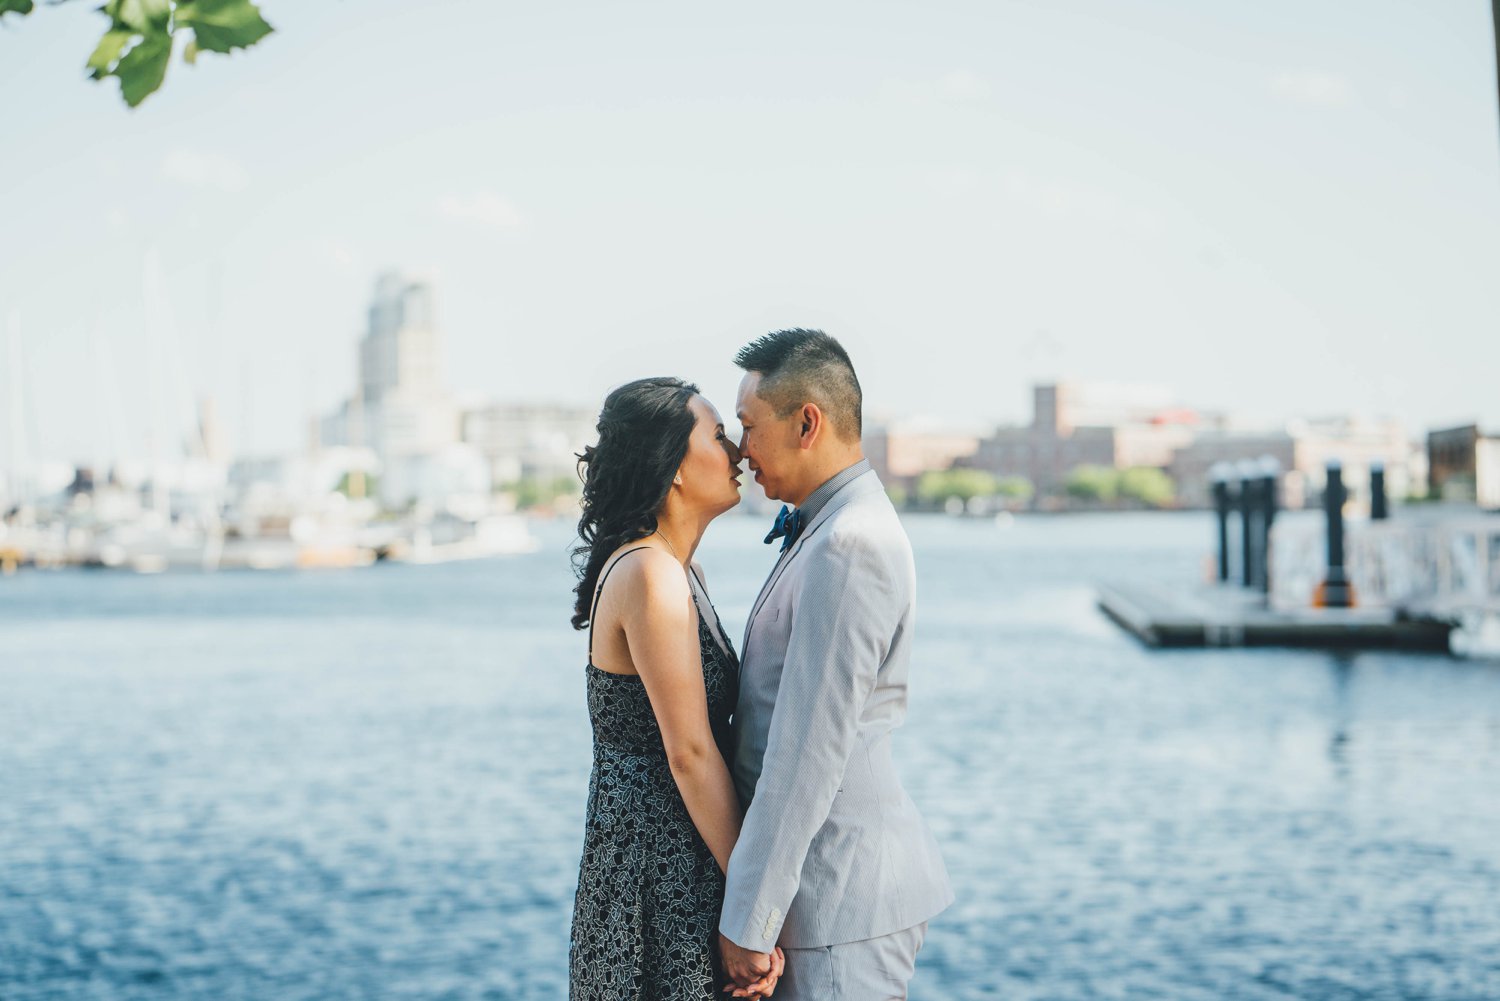 61NYC-NJ-ENGAGEMENT-PHOTOGRAPHY-BY-INTOTHESTORY-MOO-JAE.JPG